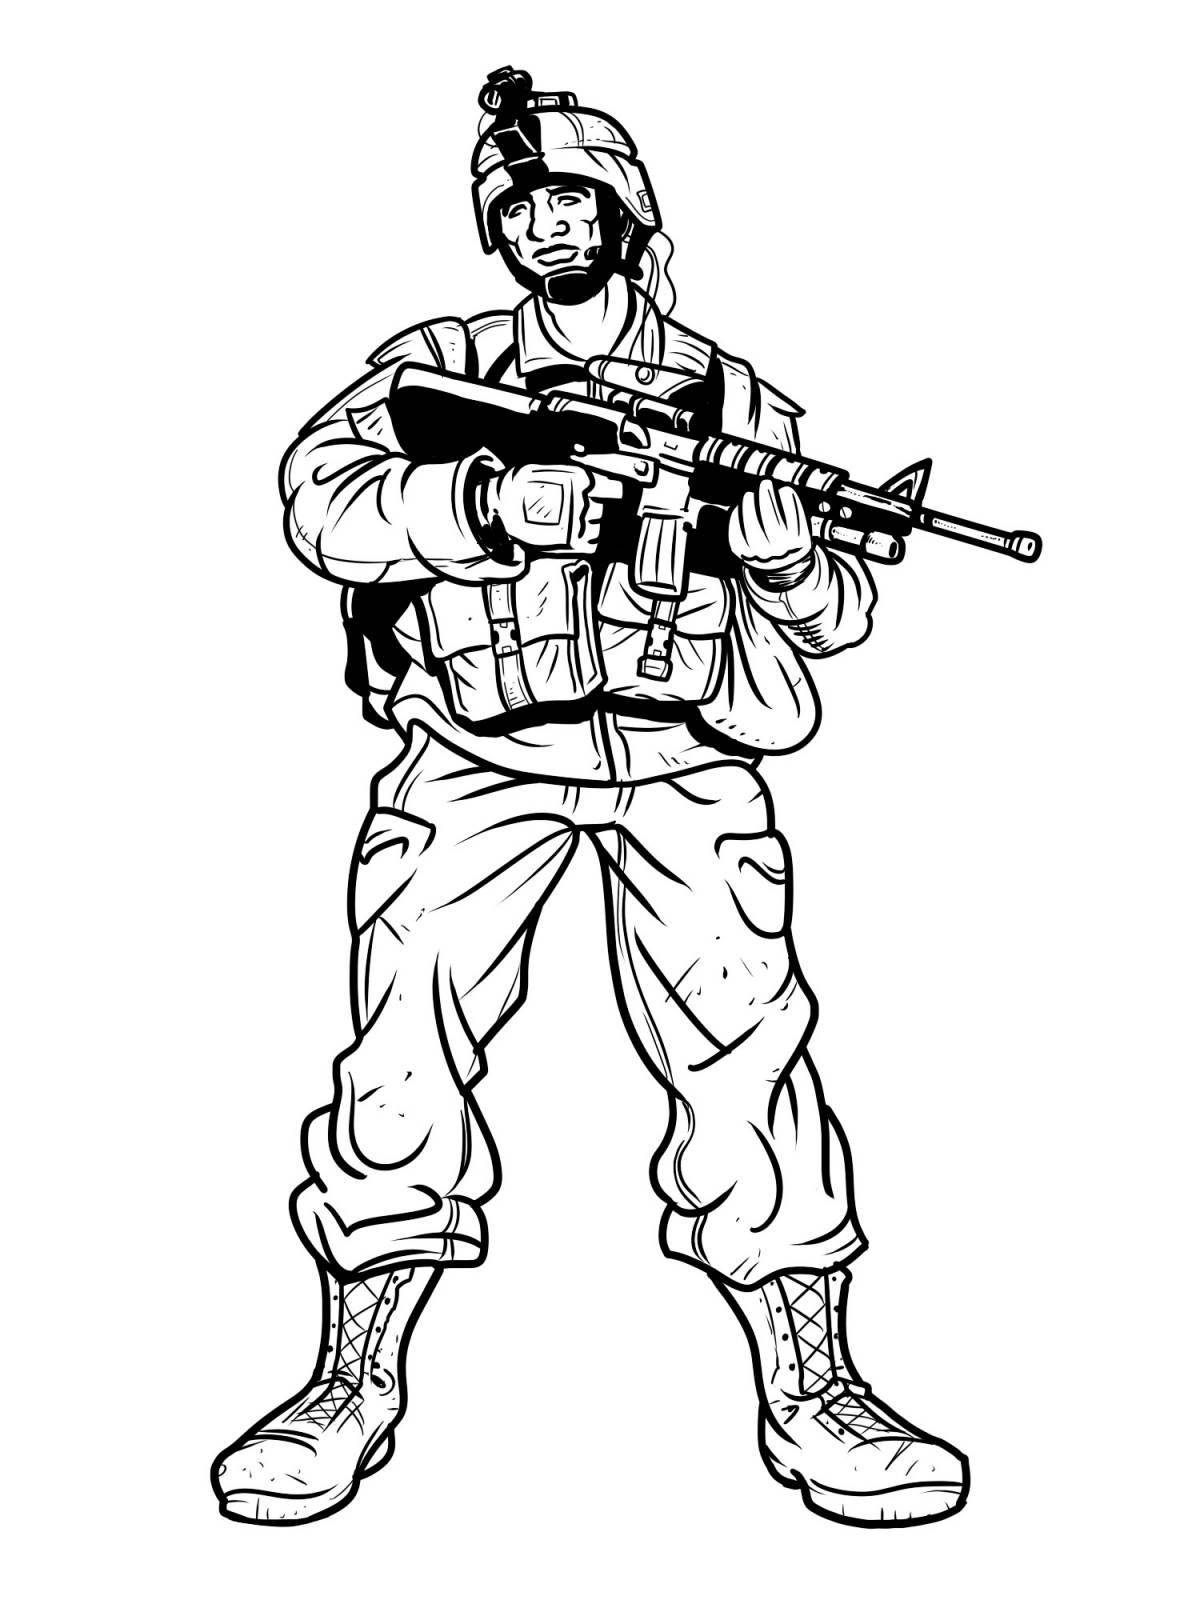 Rainbow soldier and children's coloring book